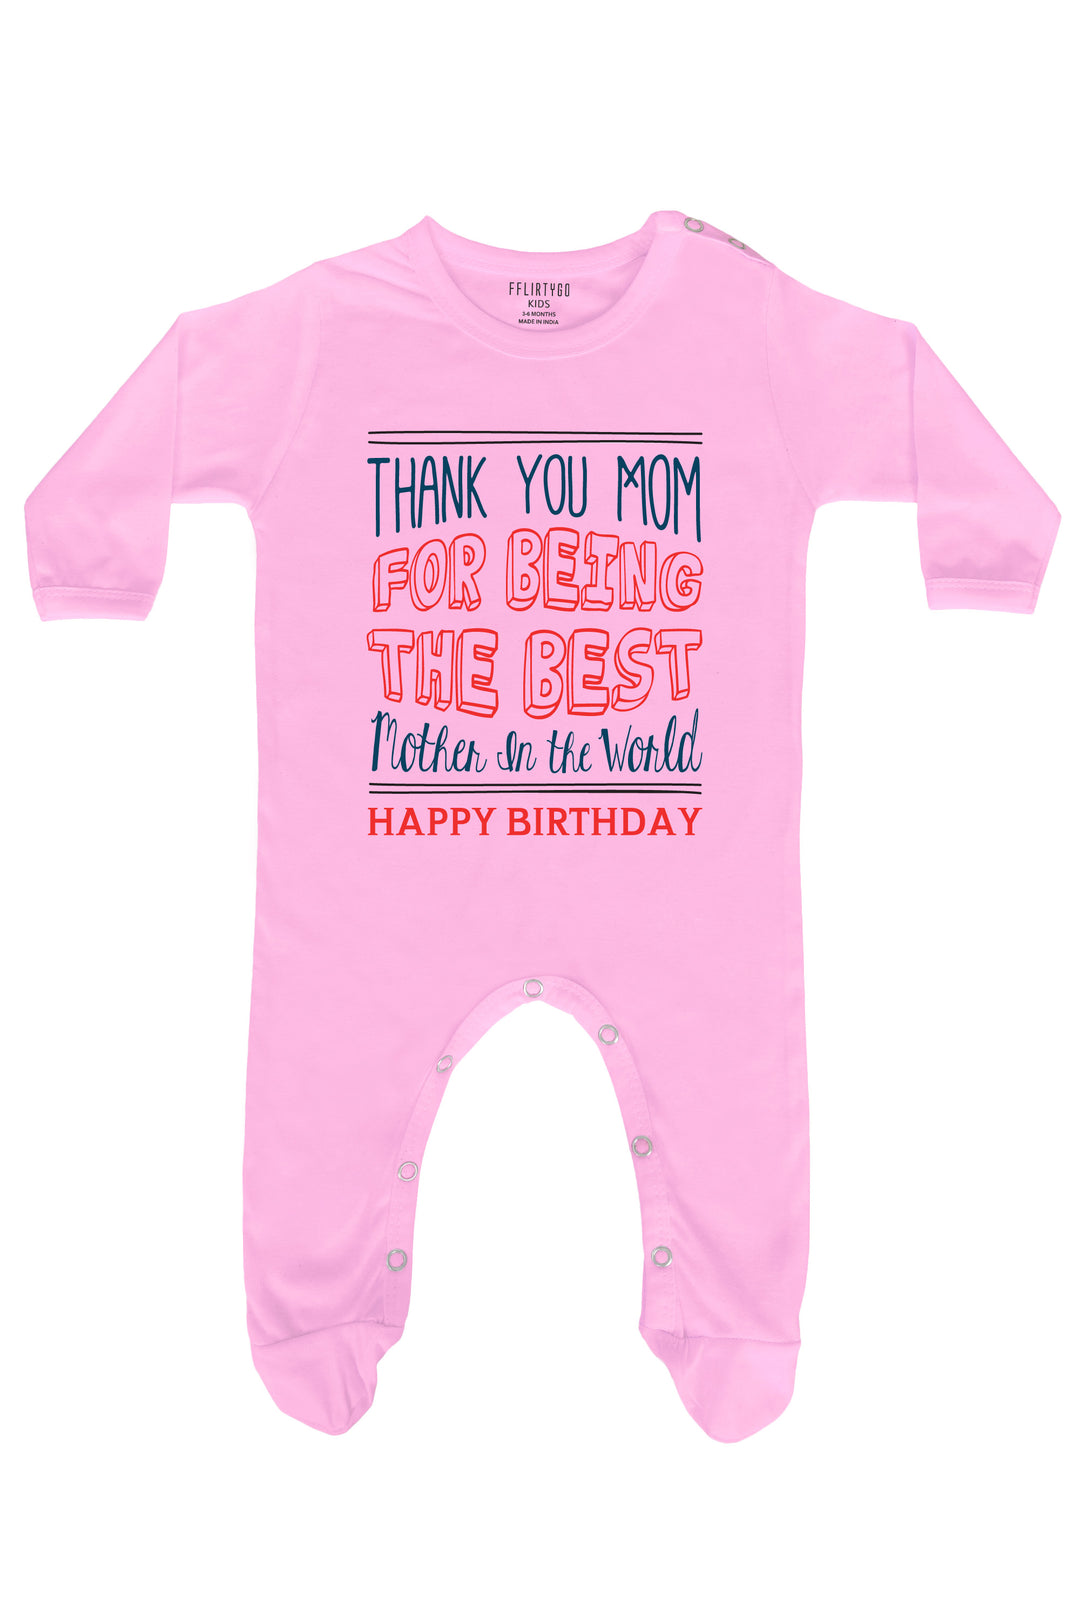 The Best Mother In The World Baby Romper | Onesies